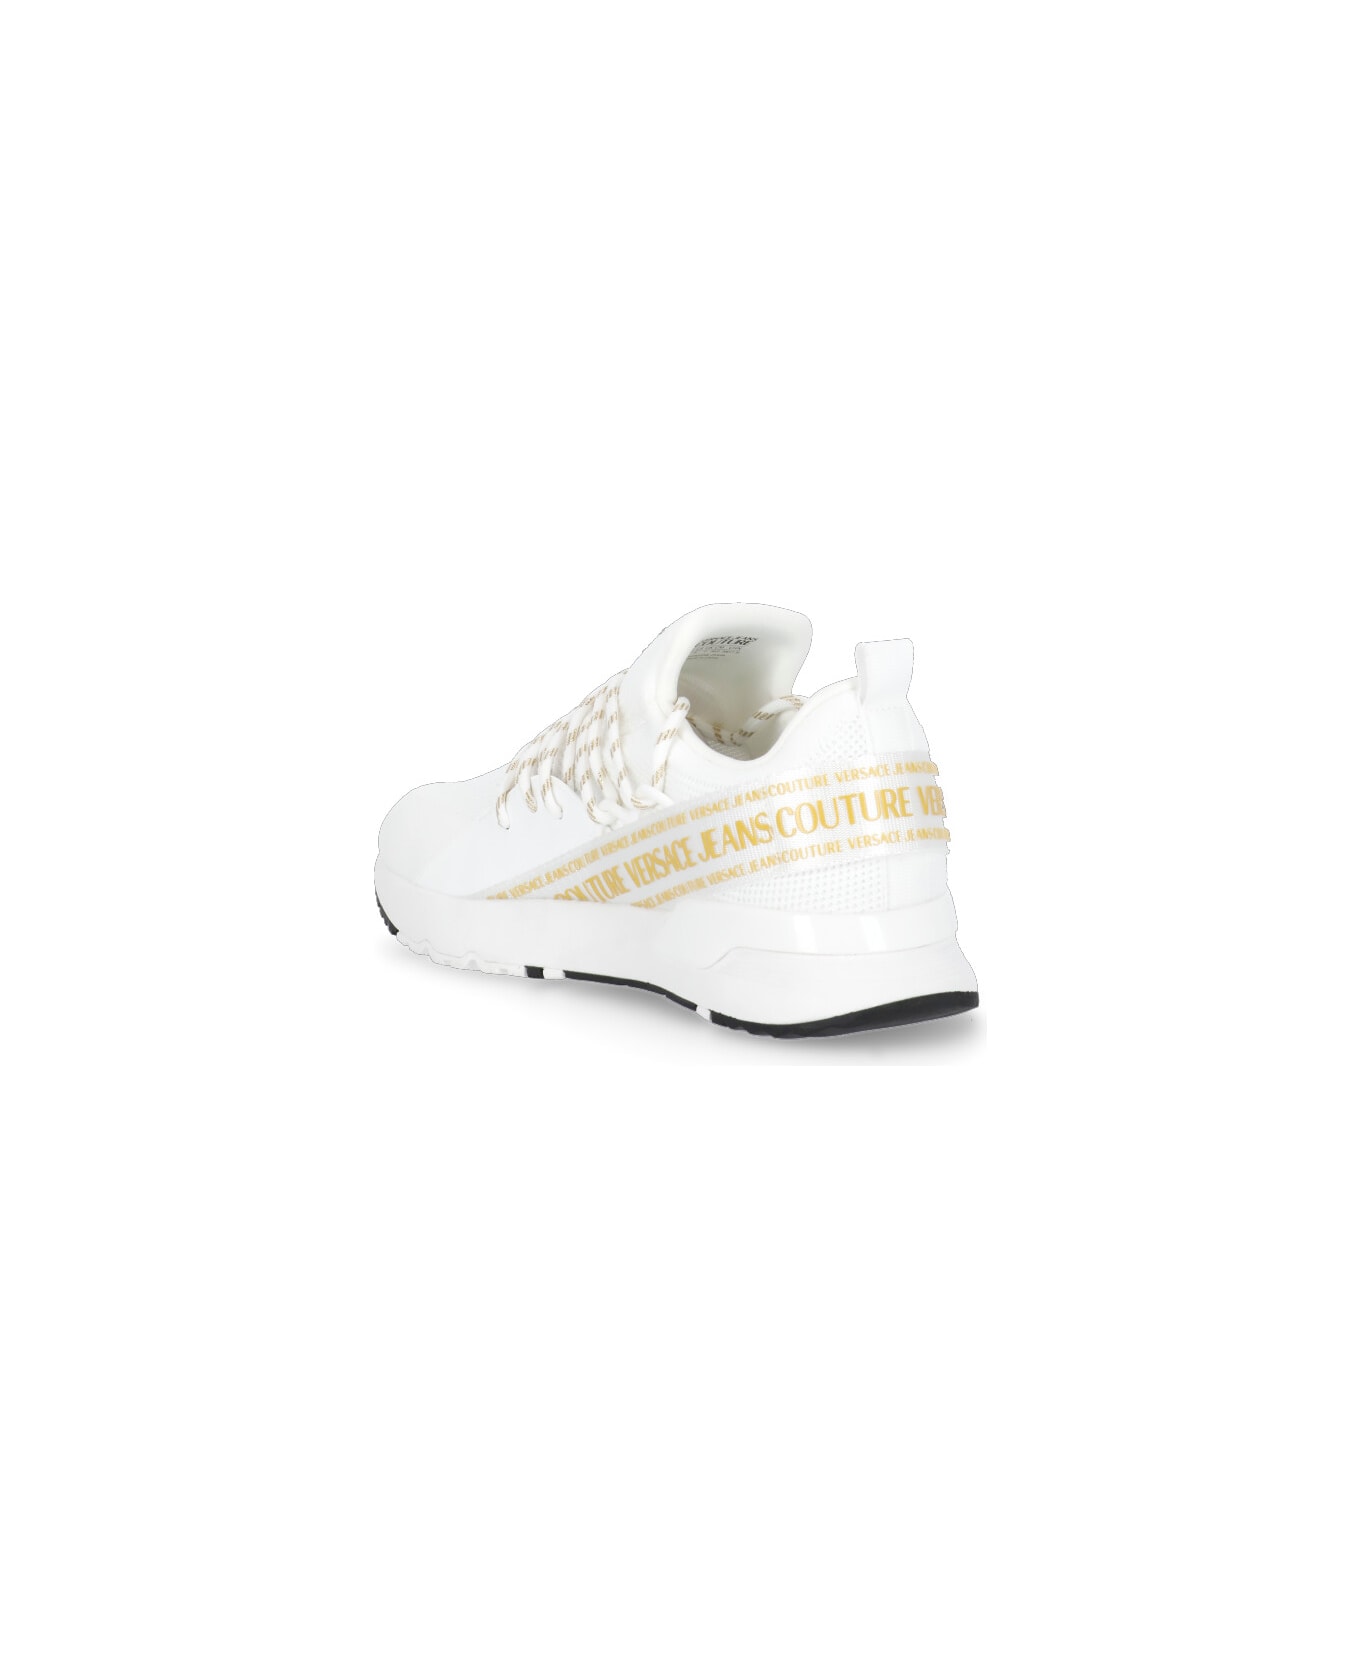 Versace Jeans Couture Shoes - White スニーカー